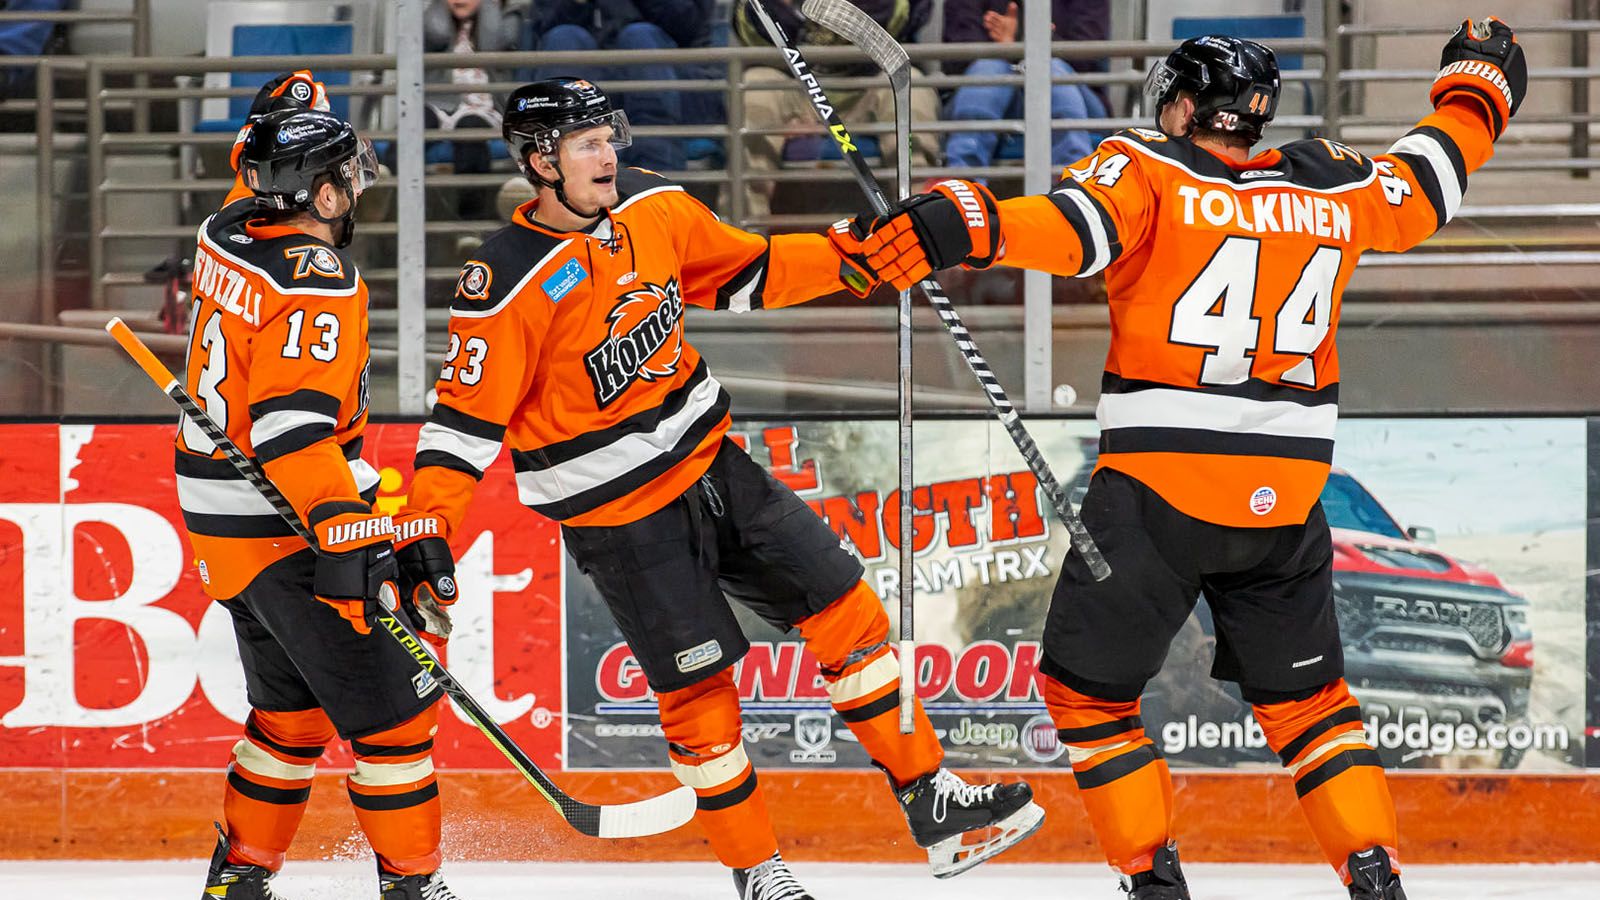 The Komets will open their home campaign Oct. 22.